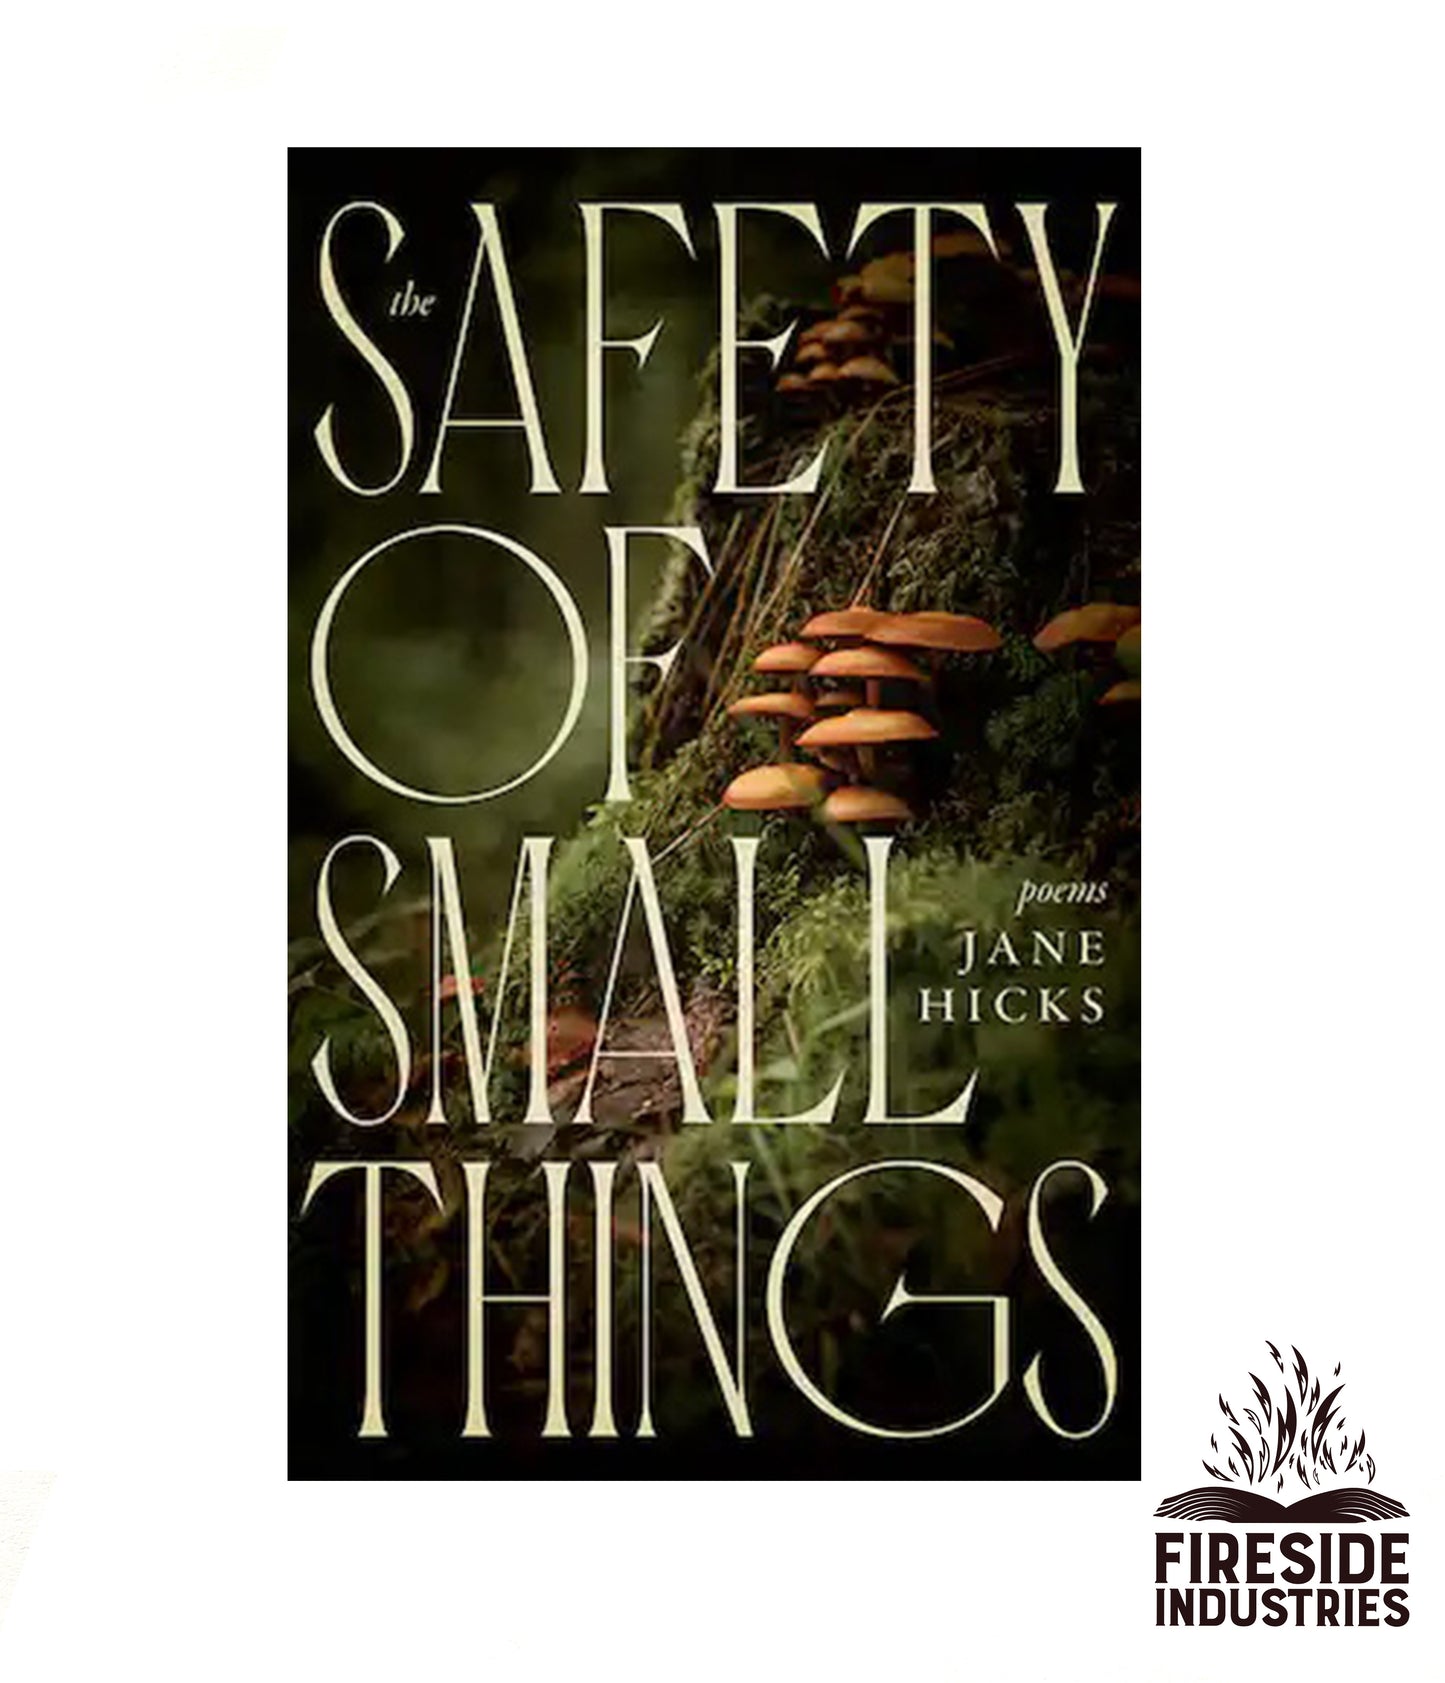 The Safety of Small Things by Jane Hicks